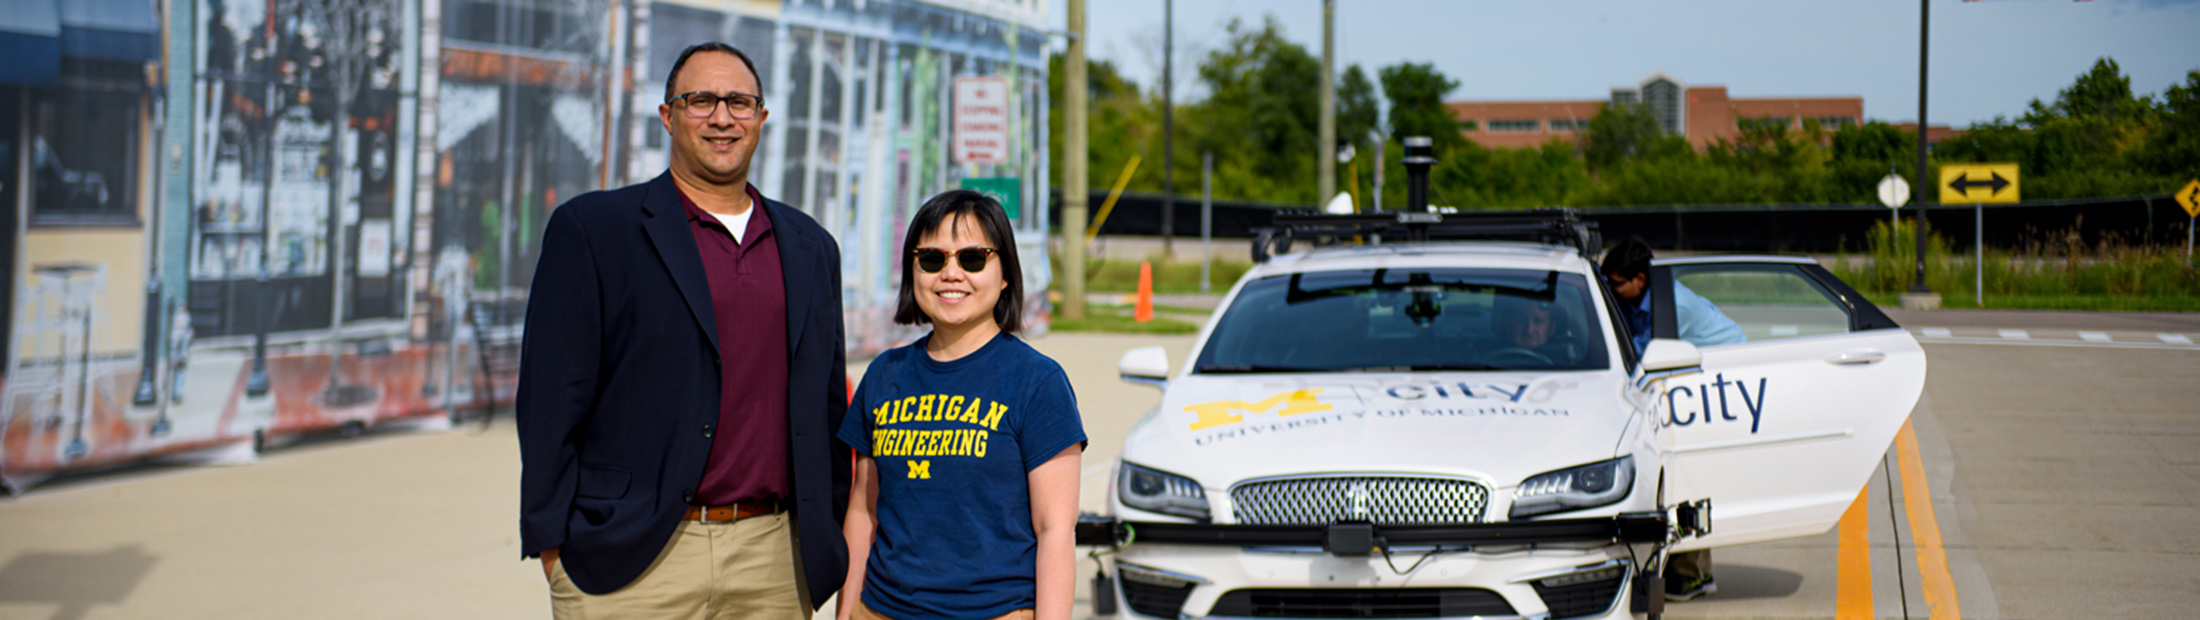 Two people standing on a road with a car labelled "Mcity" behind them.